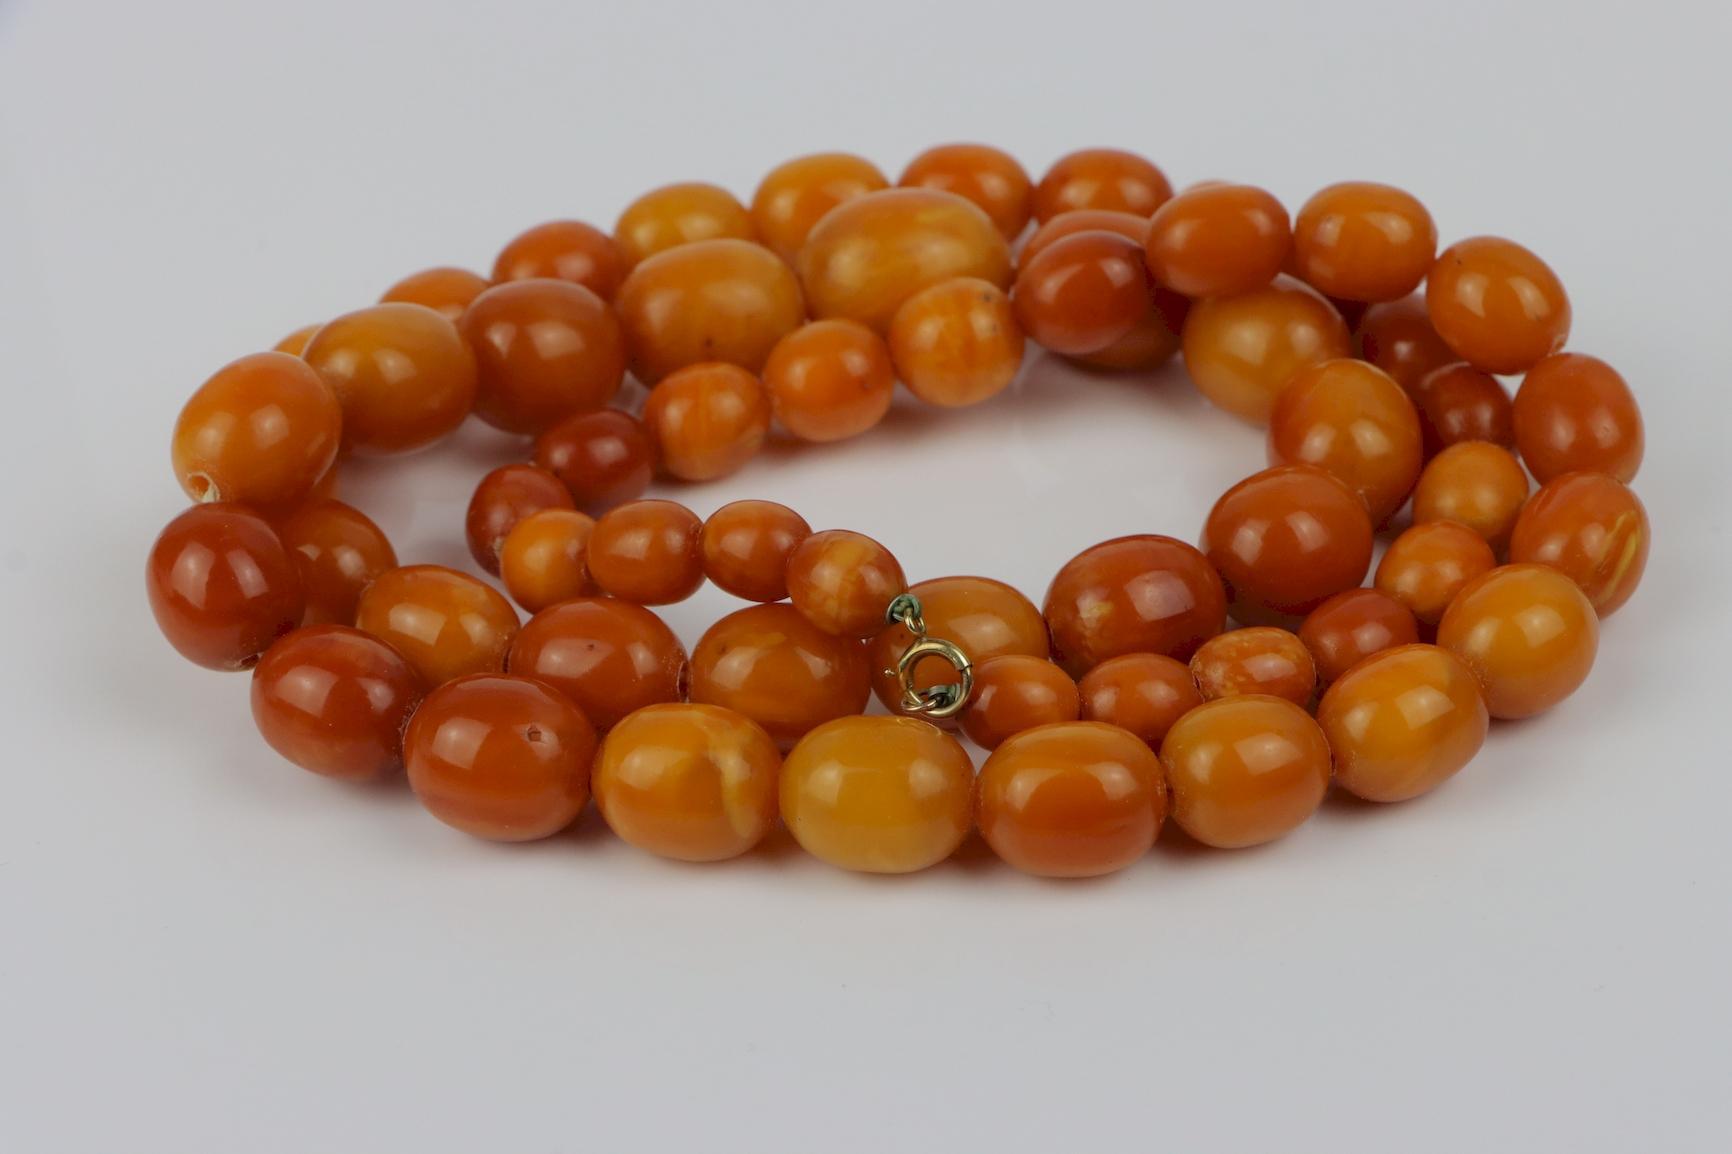 Antique 14K Gold Beeswax Amber Bead Necklace For Sale 6